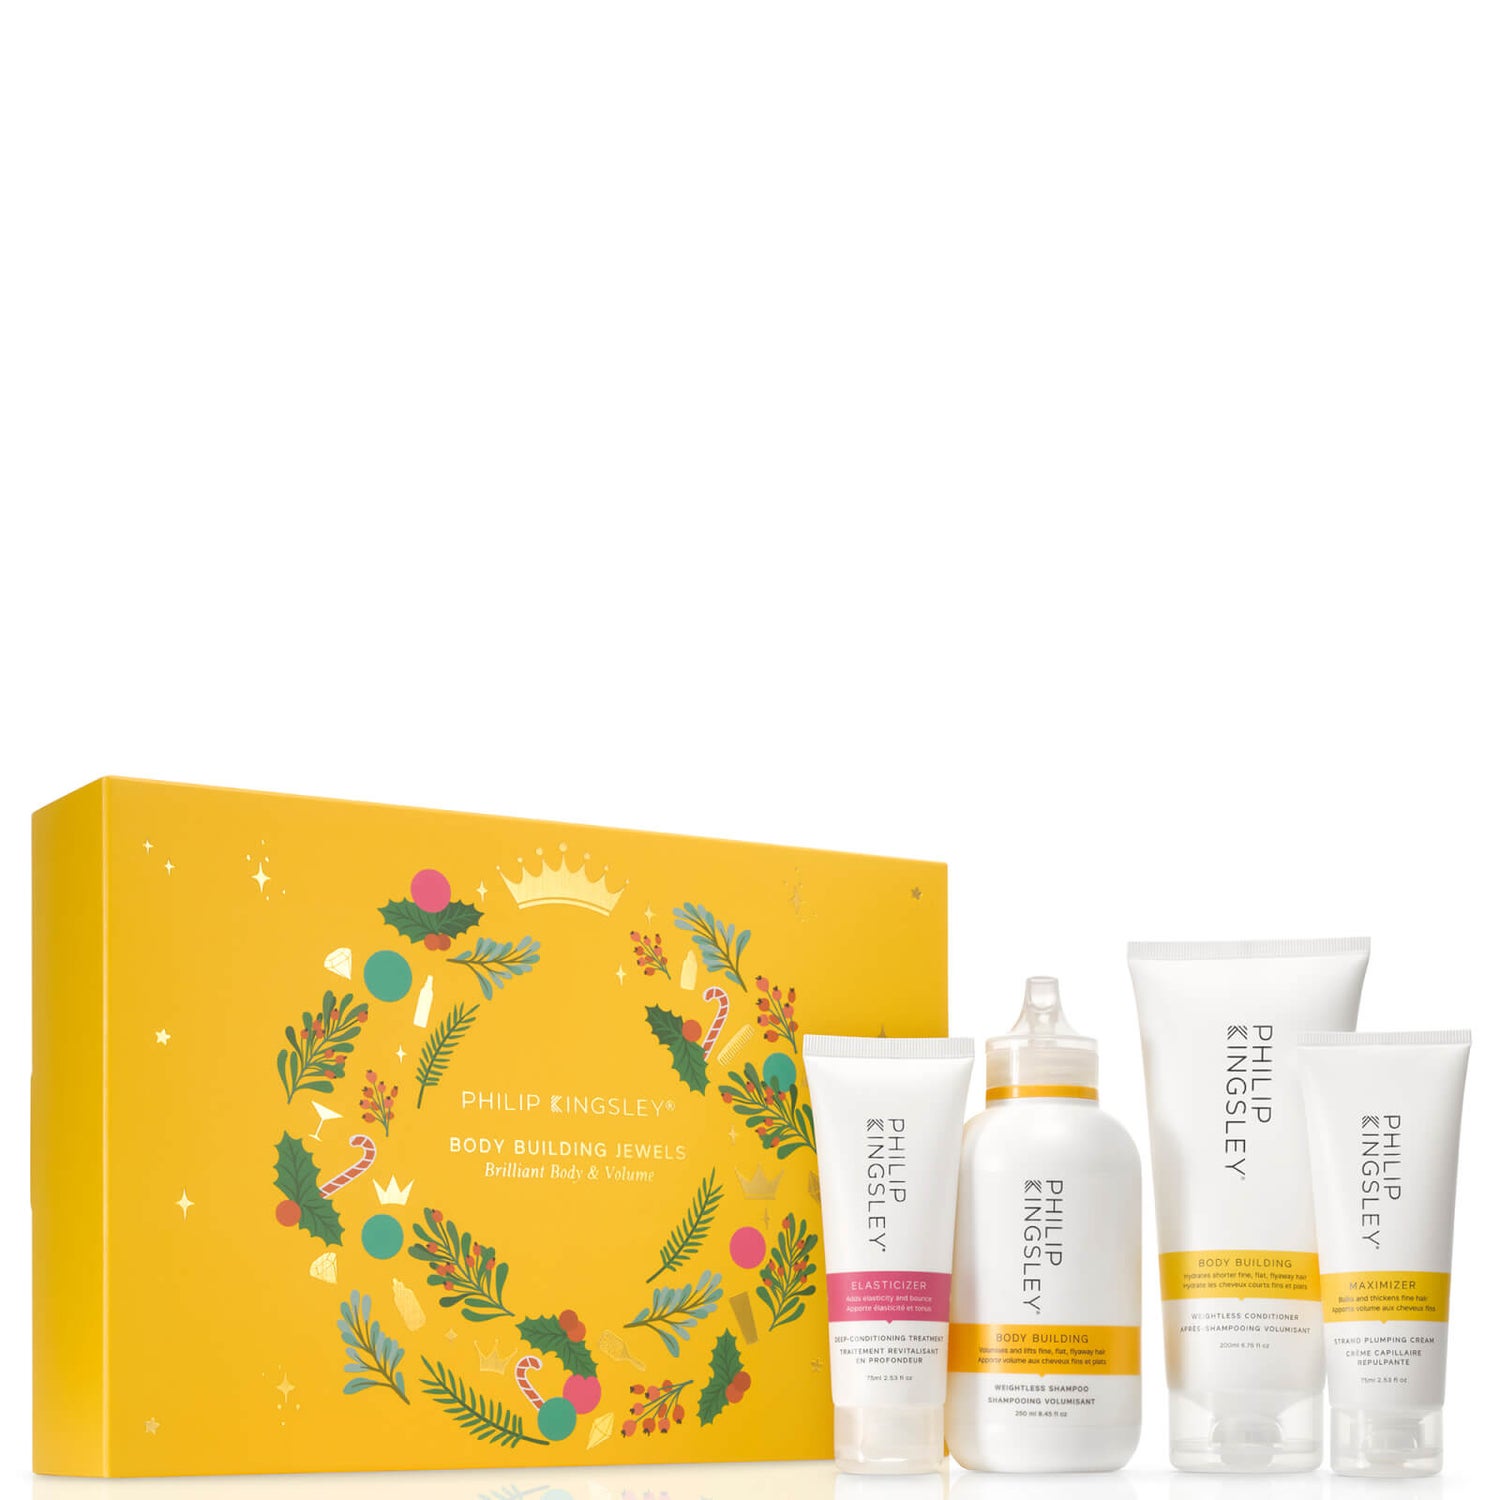 Philip Kingsley Body Building Jewels Brilliant Body and Volume Set (Worth $128.00)